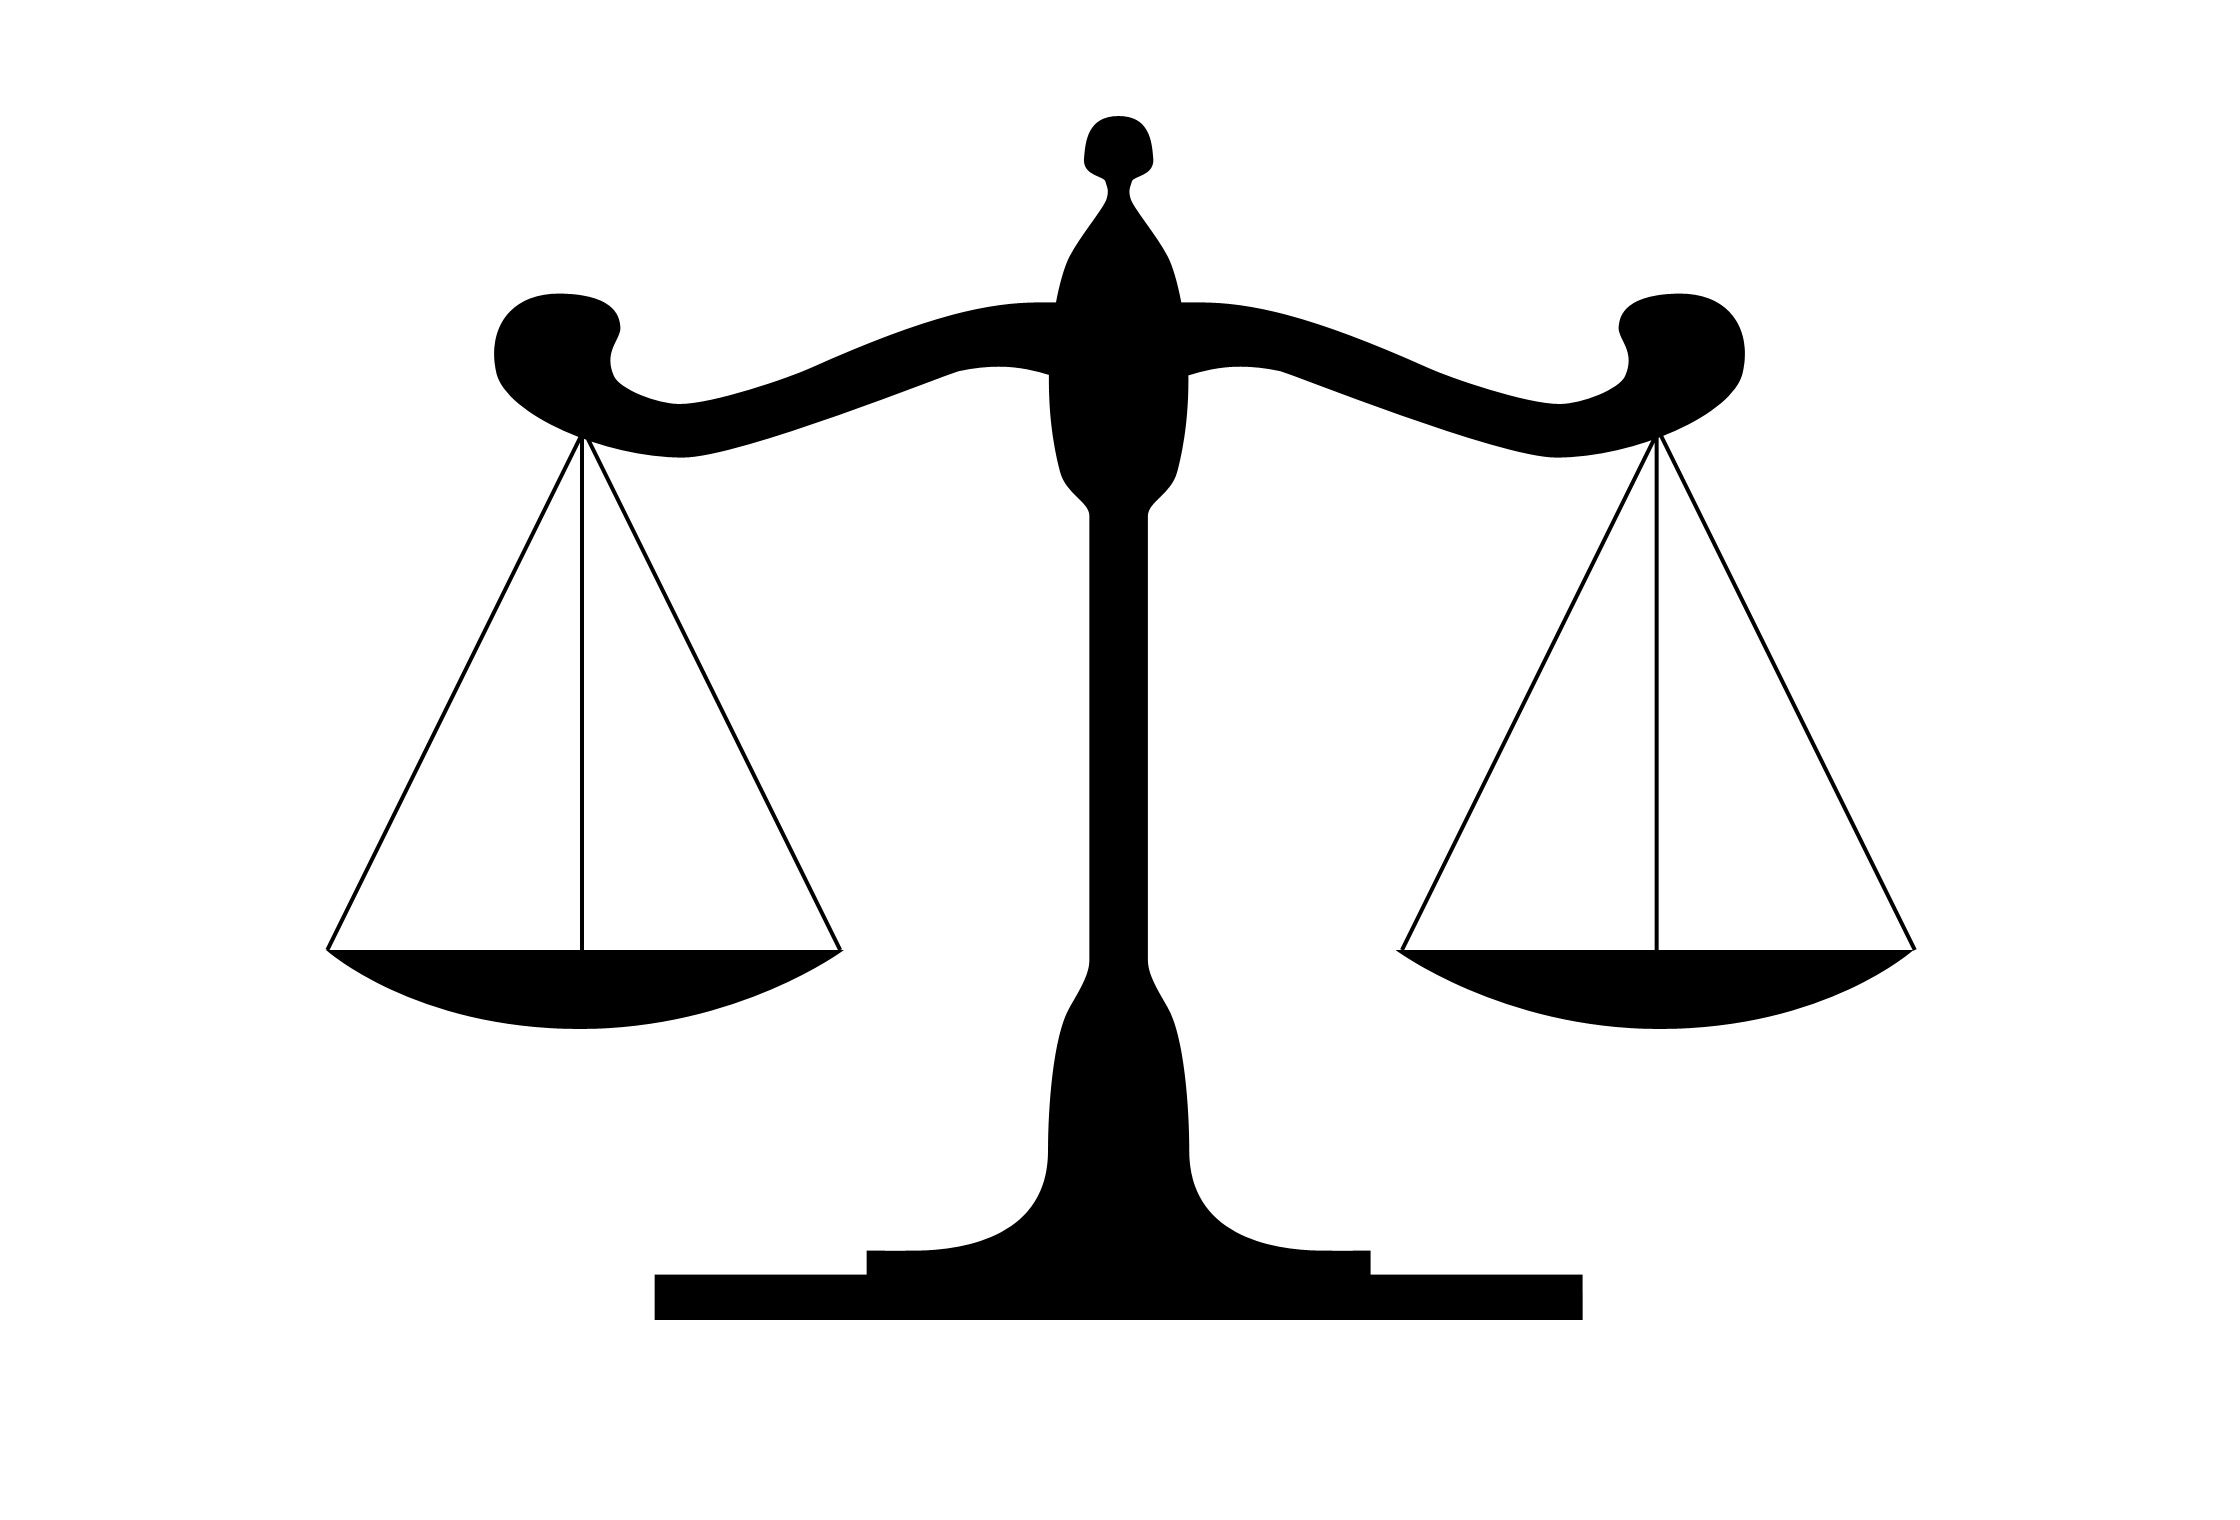 Balance Scale Object In Clipart